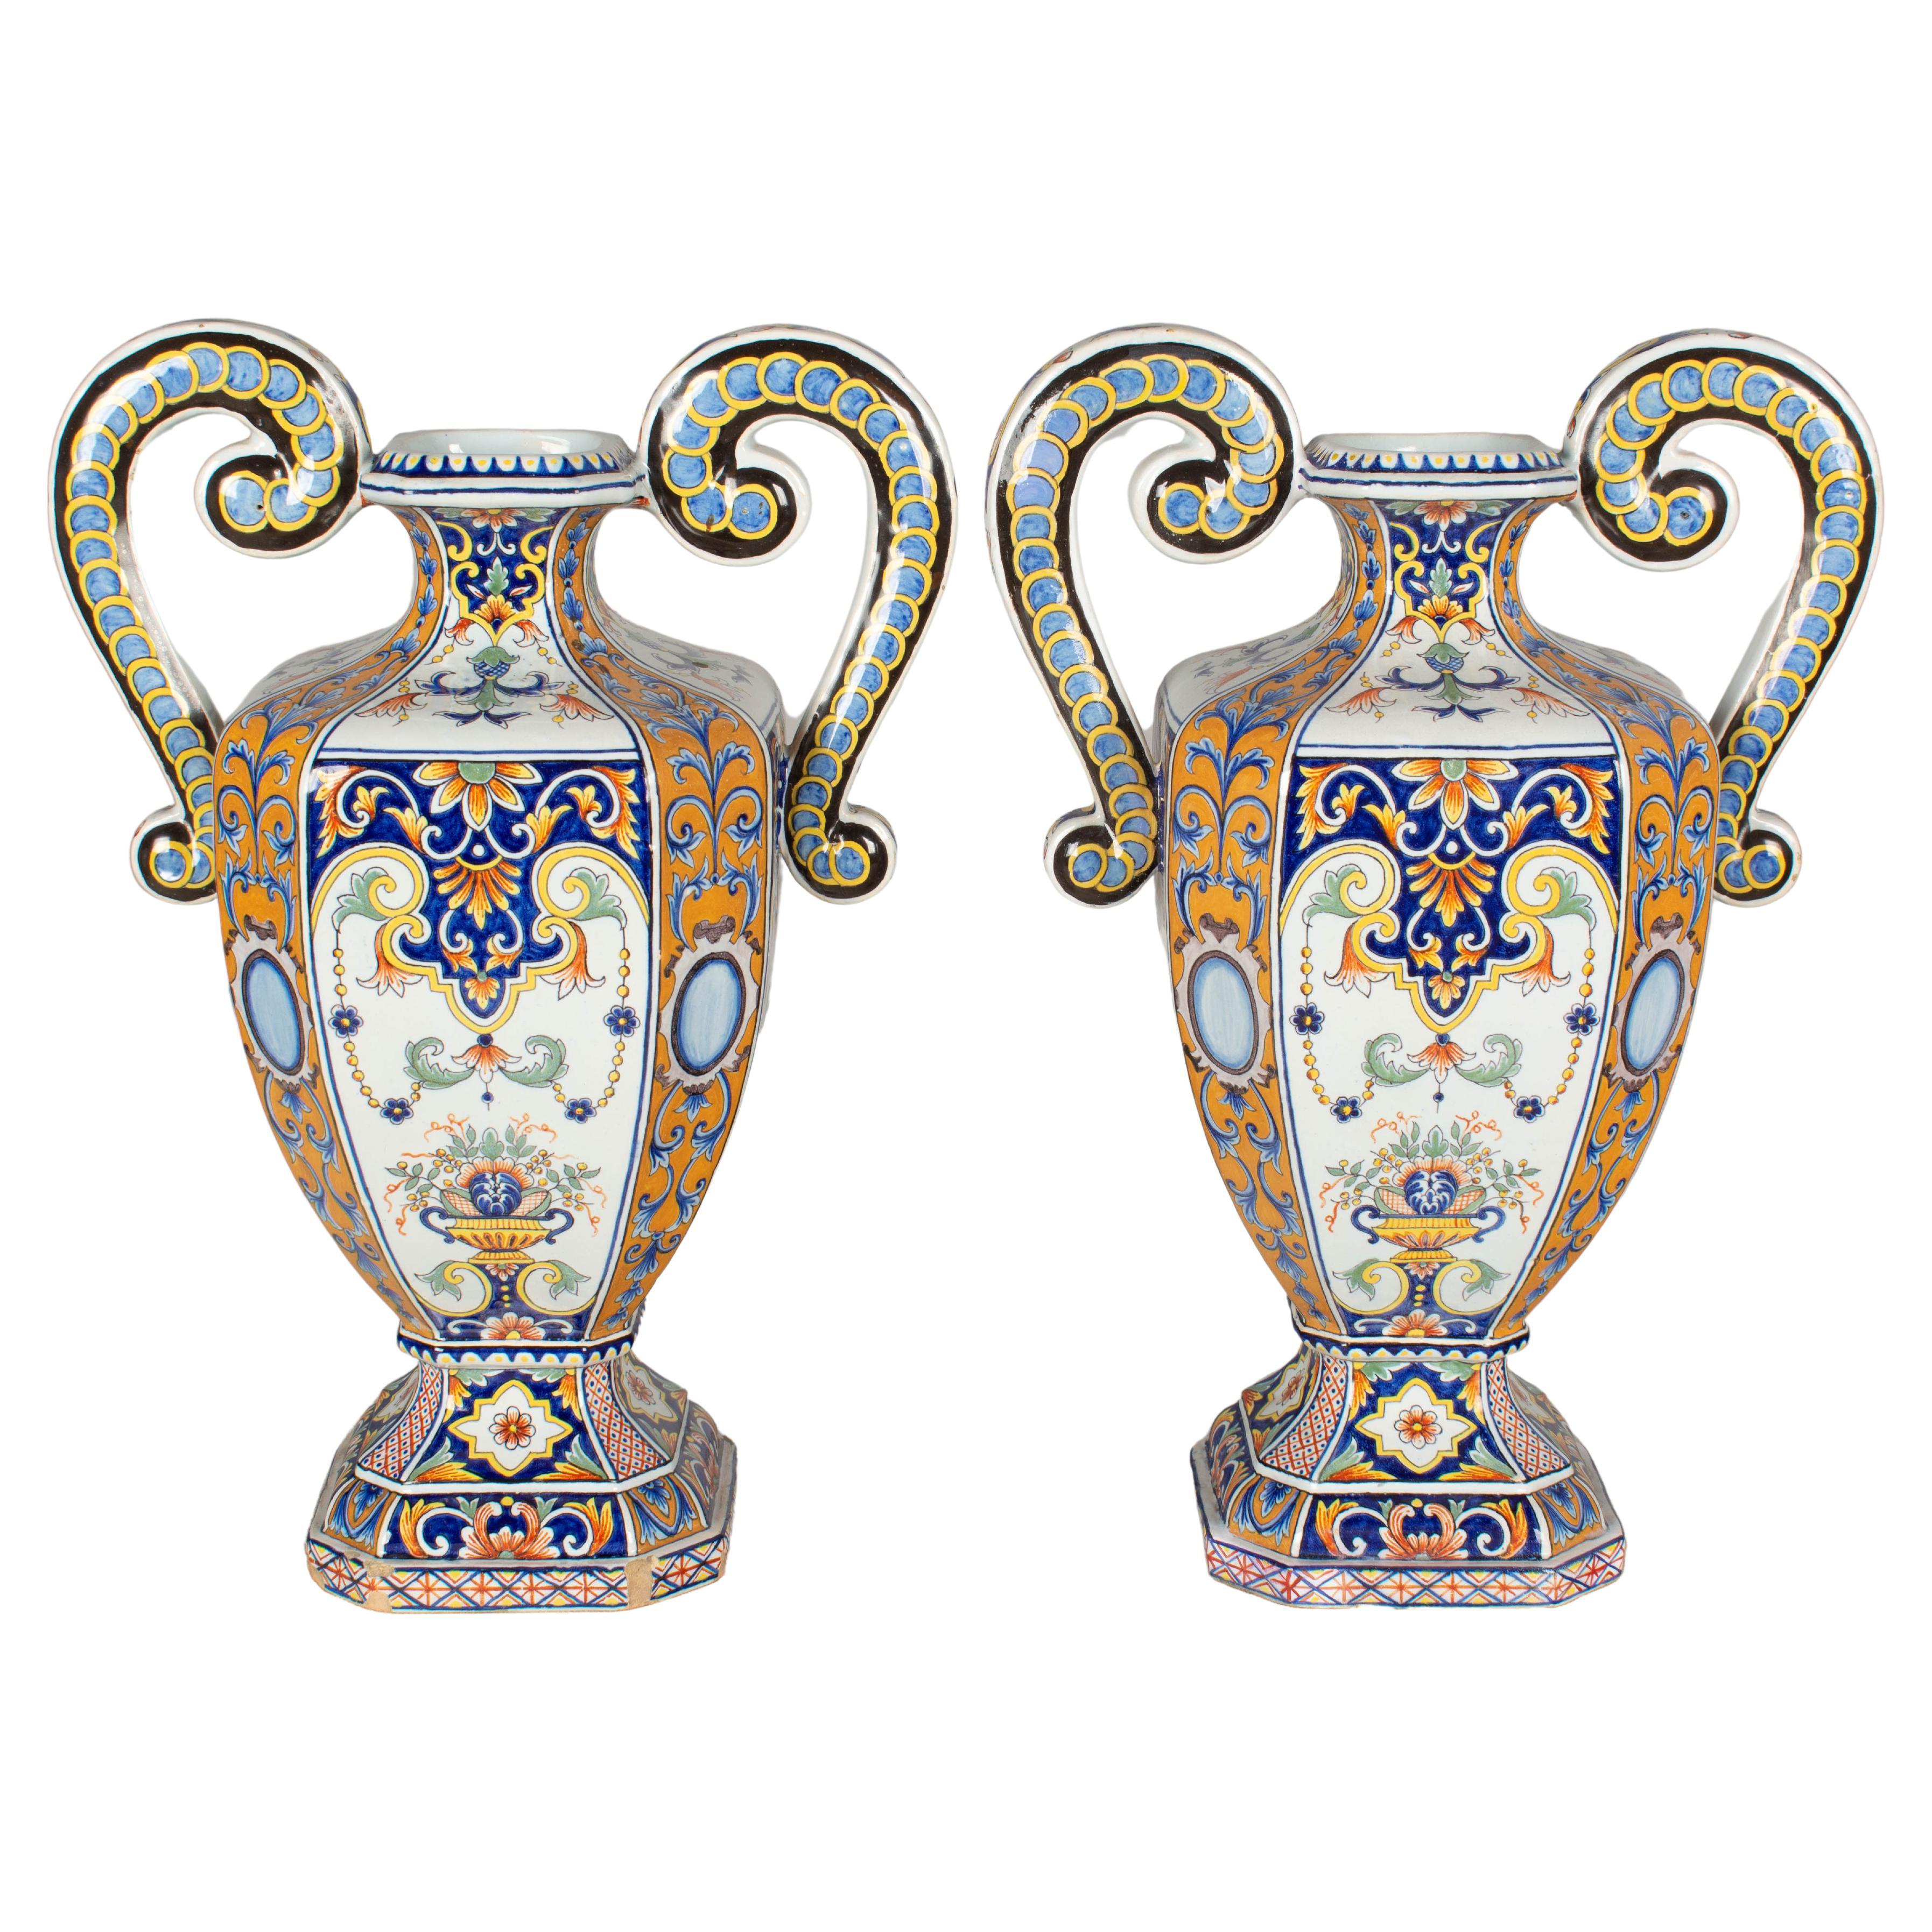 19th Century French Desvres Faience Urn Form Vases, a Pair For Sale